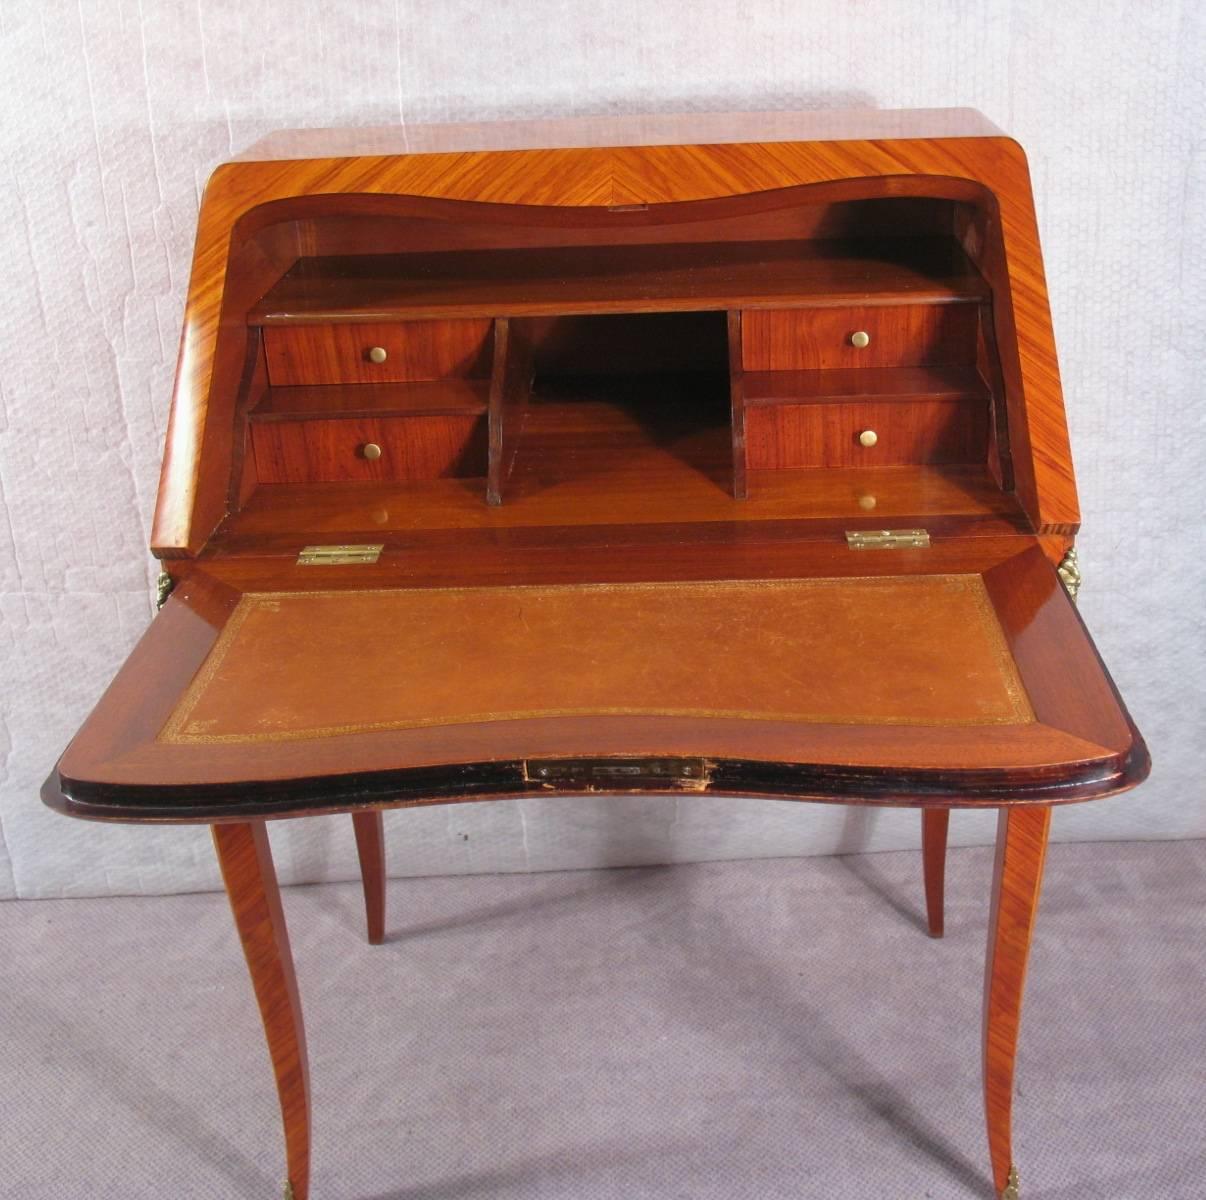 Exquisite French Louis XV style secrétaire with straight front adorned with beautiful flower marquetry made of kingwood, rosewood and boxwood veneer, drop front writing desk with four interior drawers, two exterior drawers the original pulls and